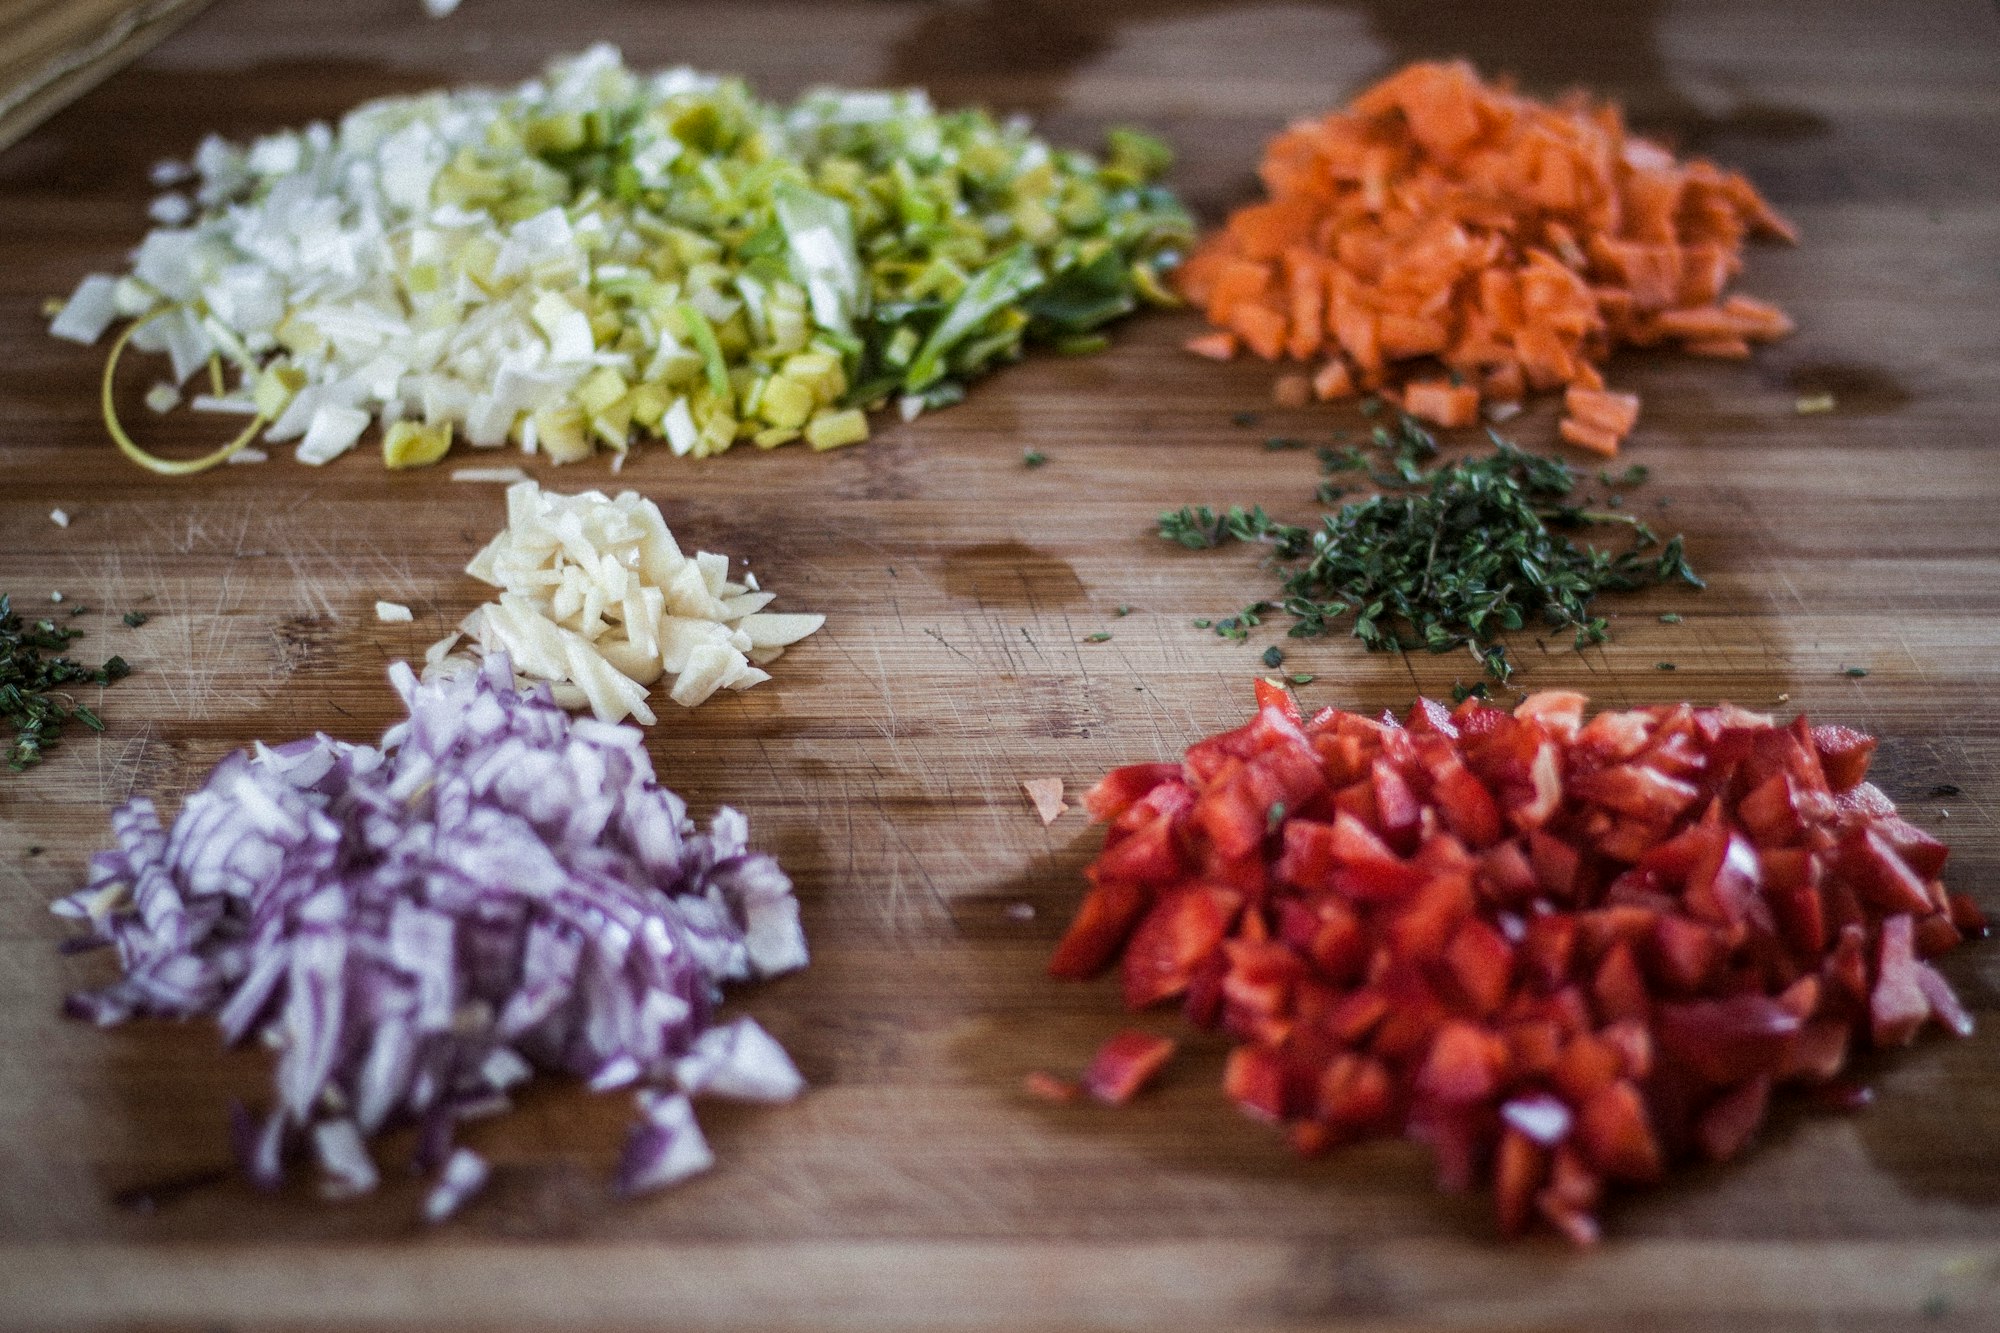 A chopping board with diced vegetables and herbs